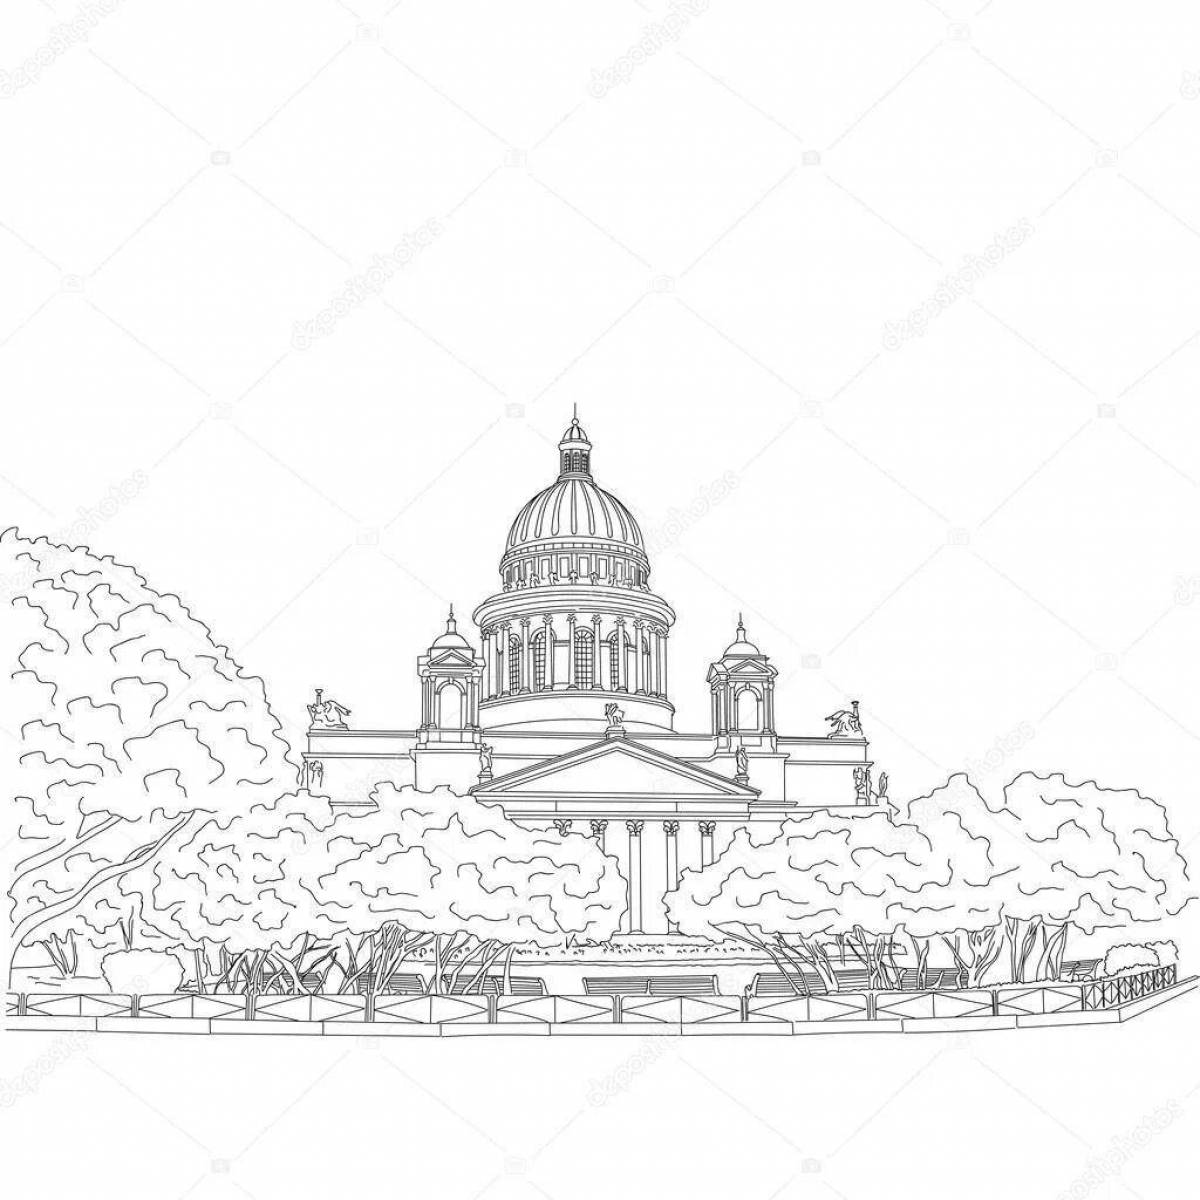 Impressive St. Isaac's Cathedral coloring book